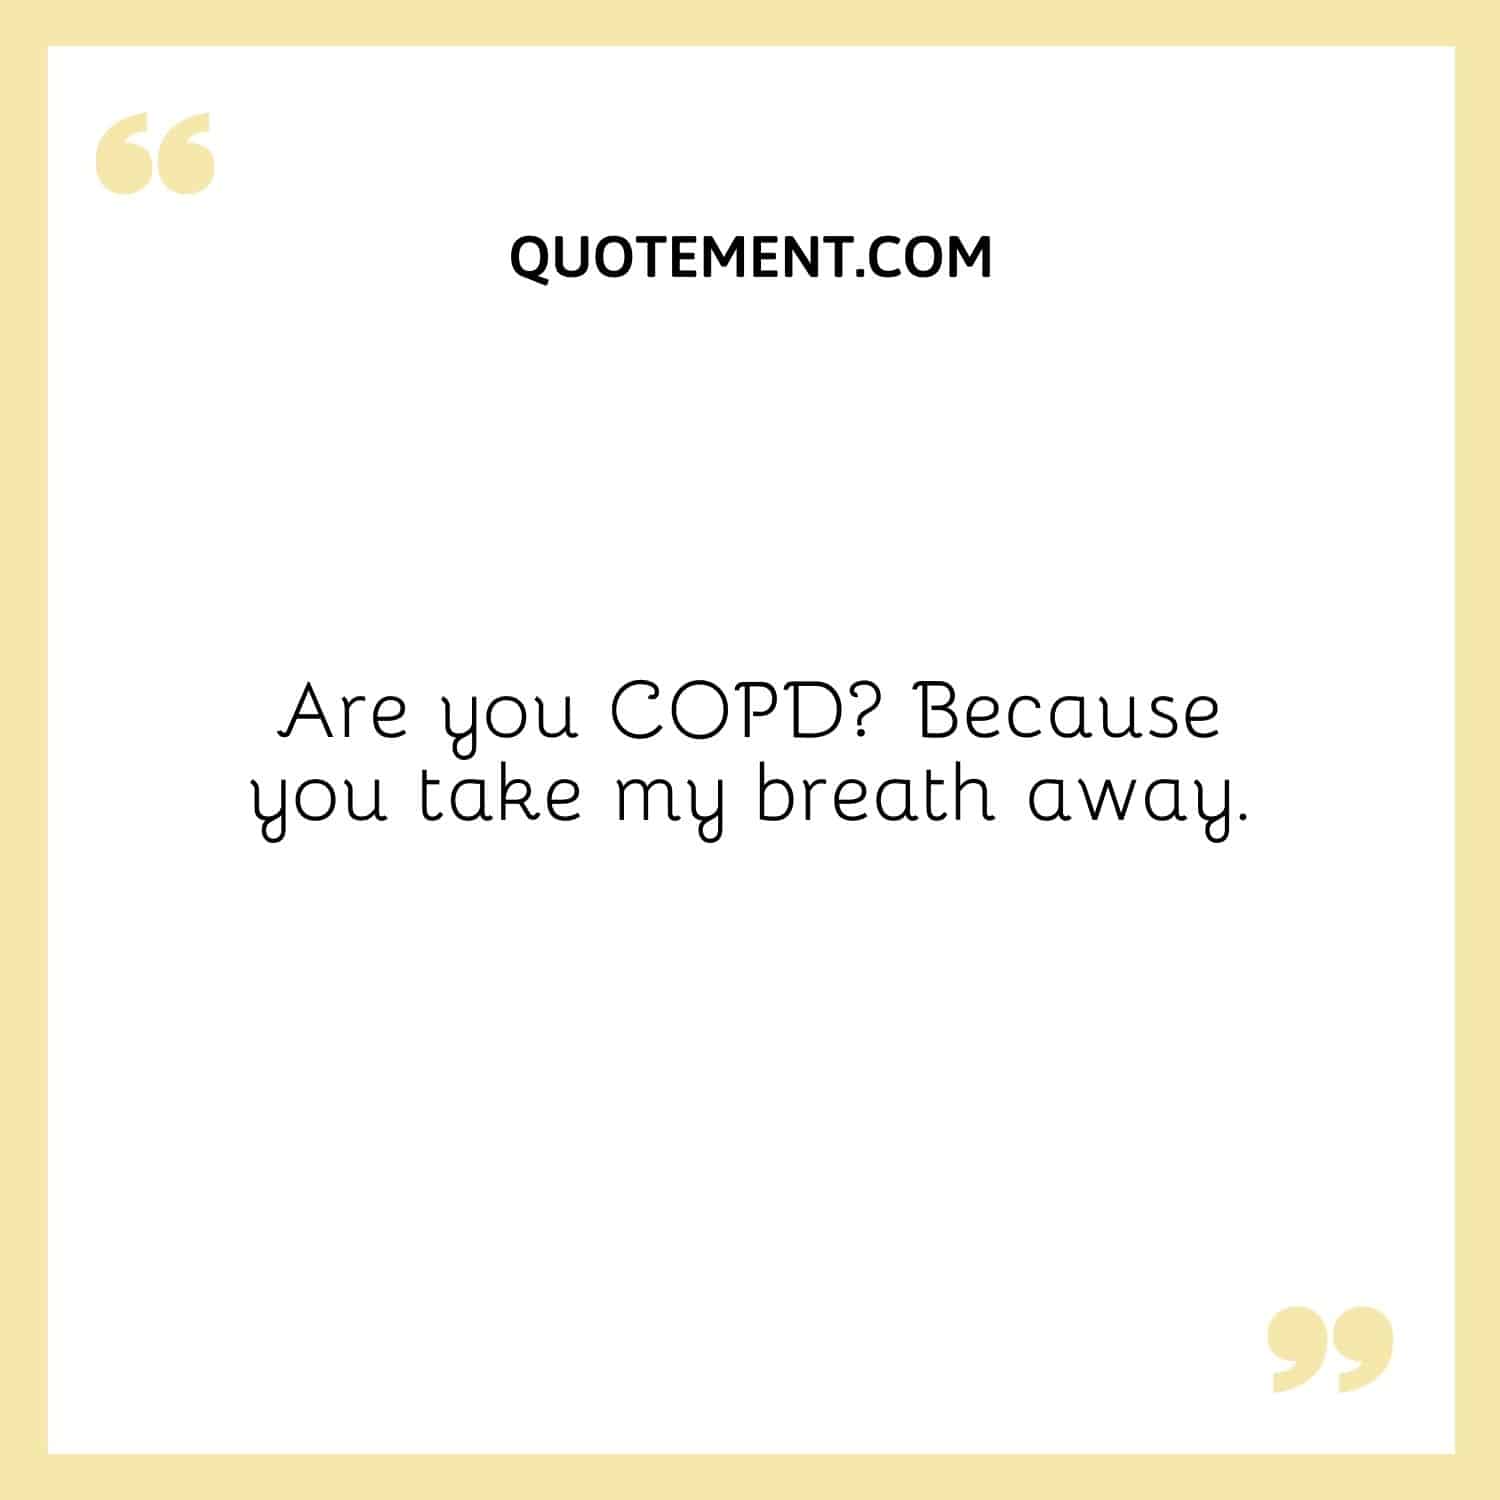 Are you COPD Because you take my breath away.